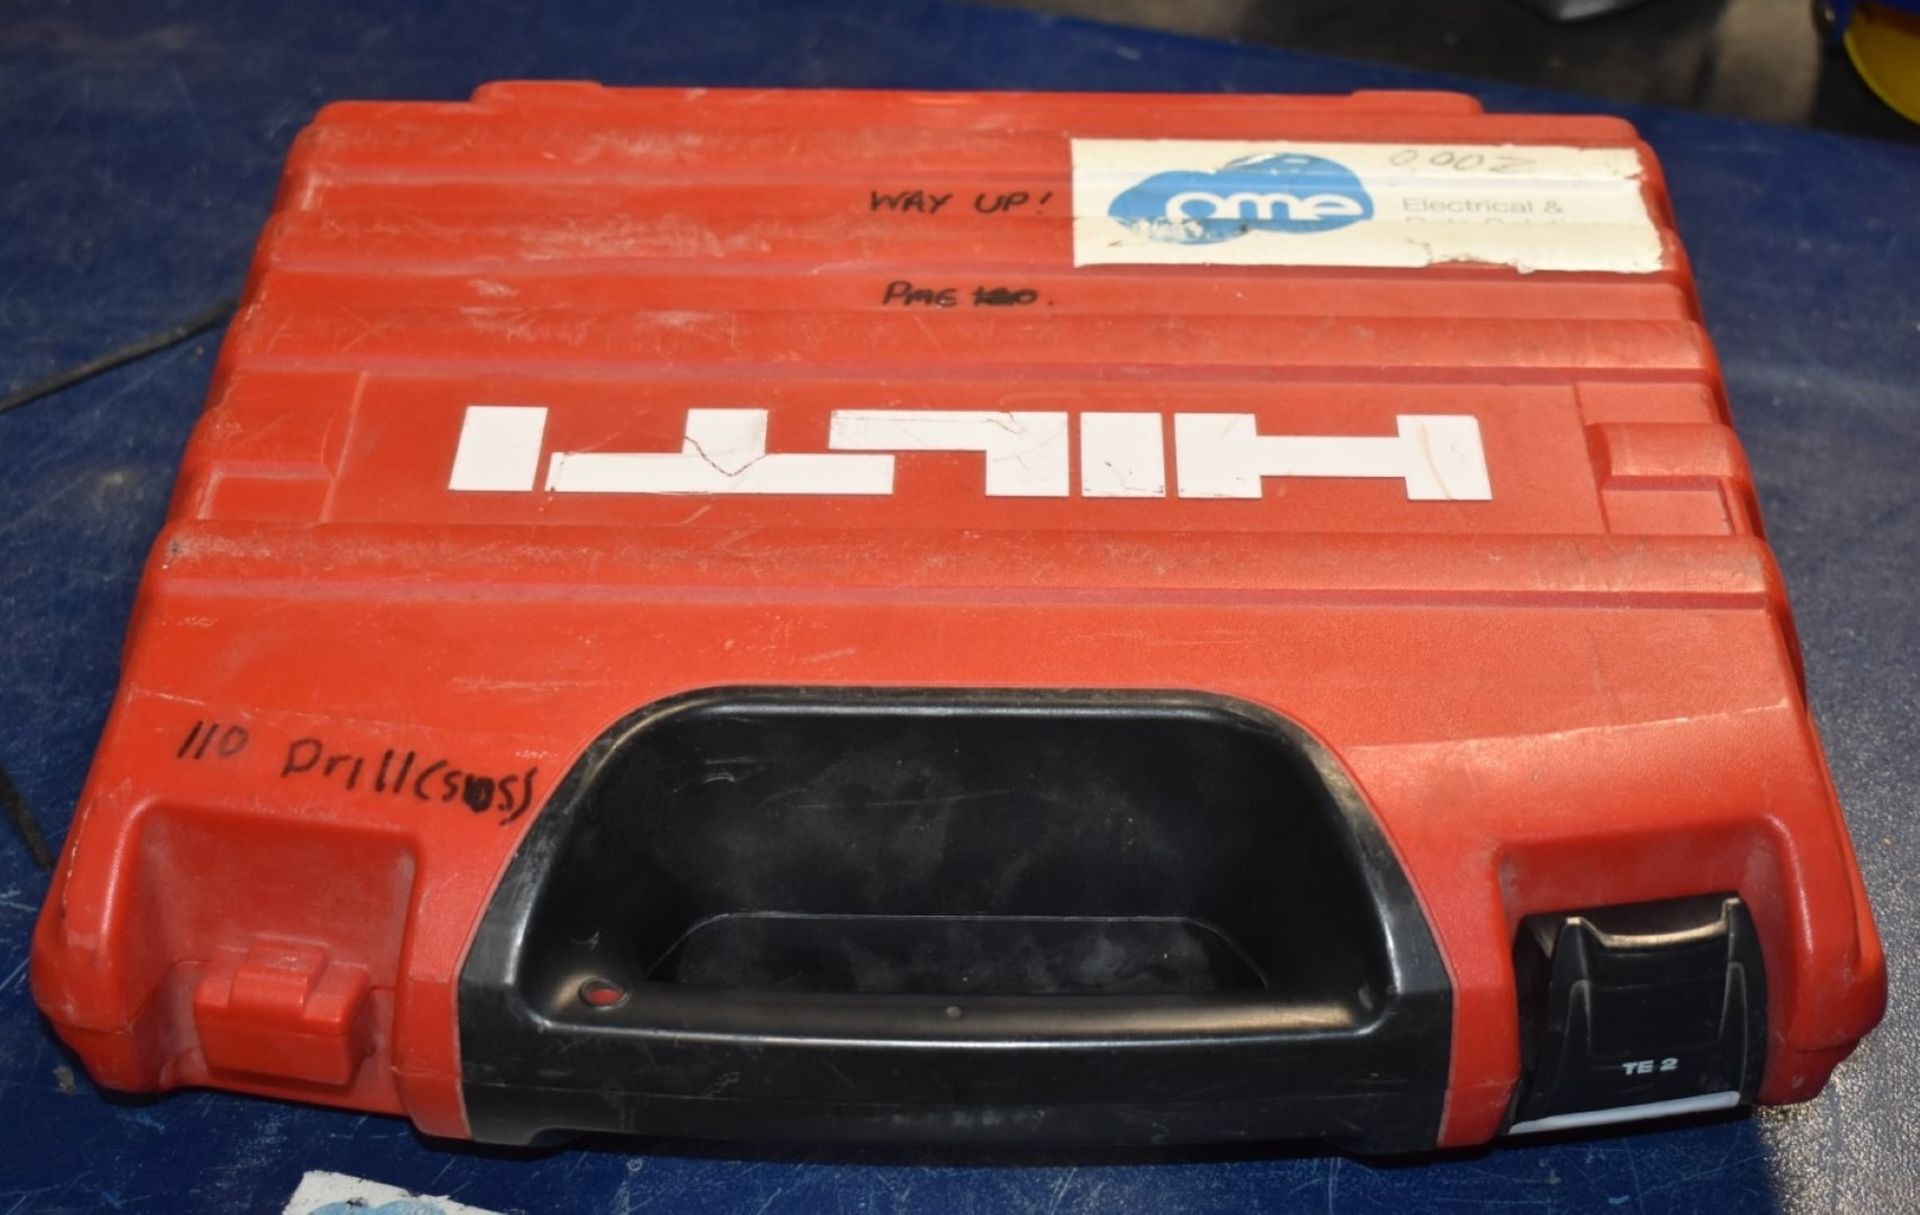 1 x Hilti TE 2 110v Rotary Hammer Drill With Carry Case PME161 - Image 2 of 5